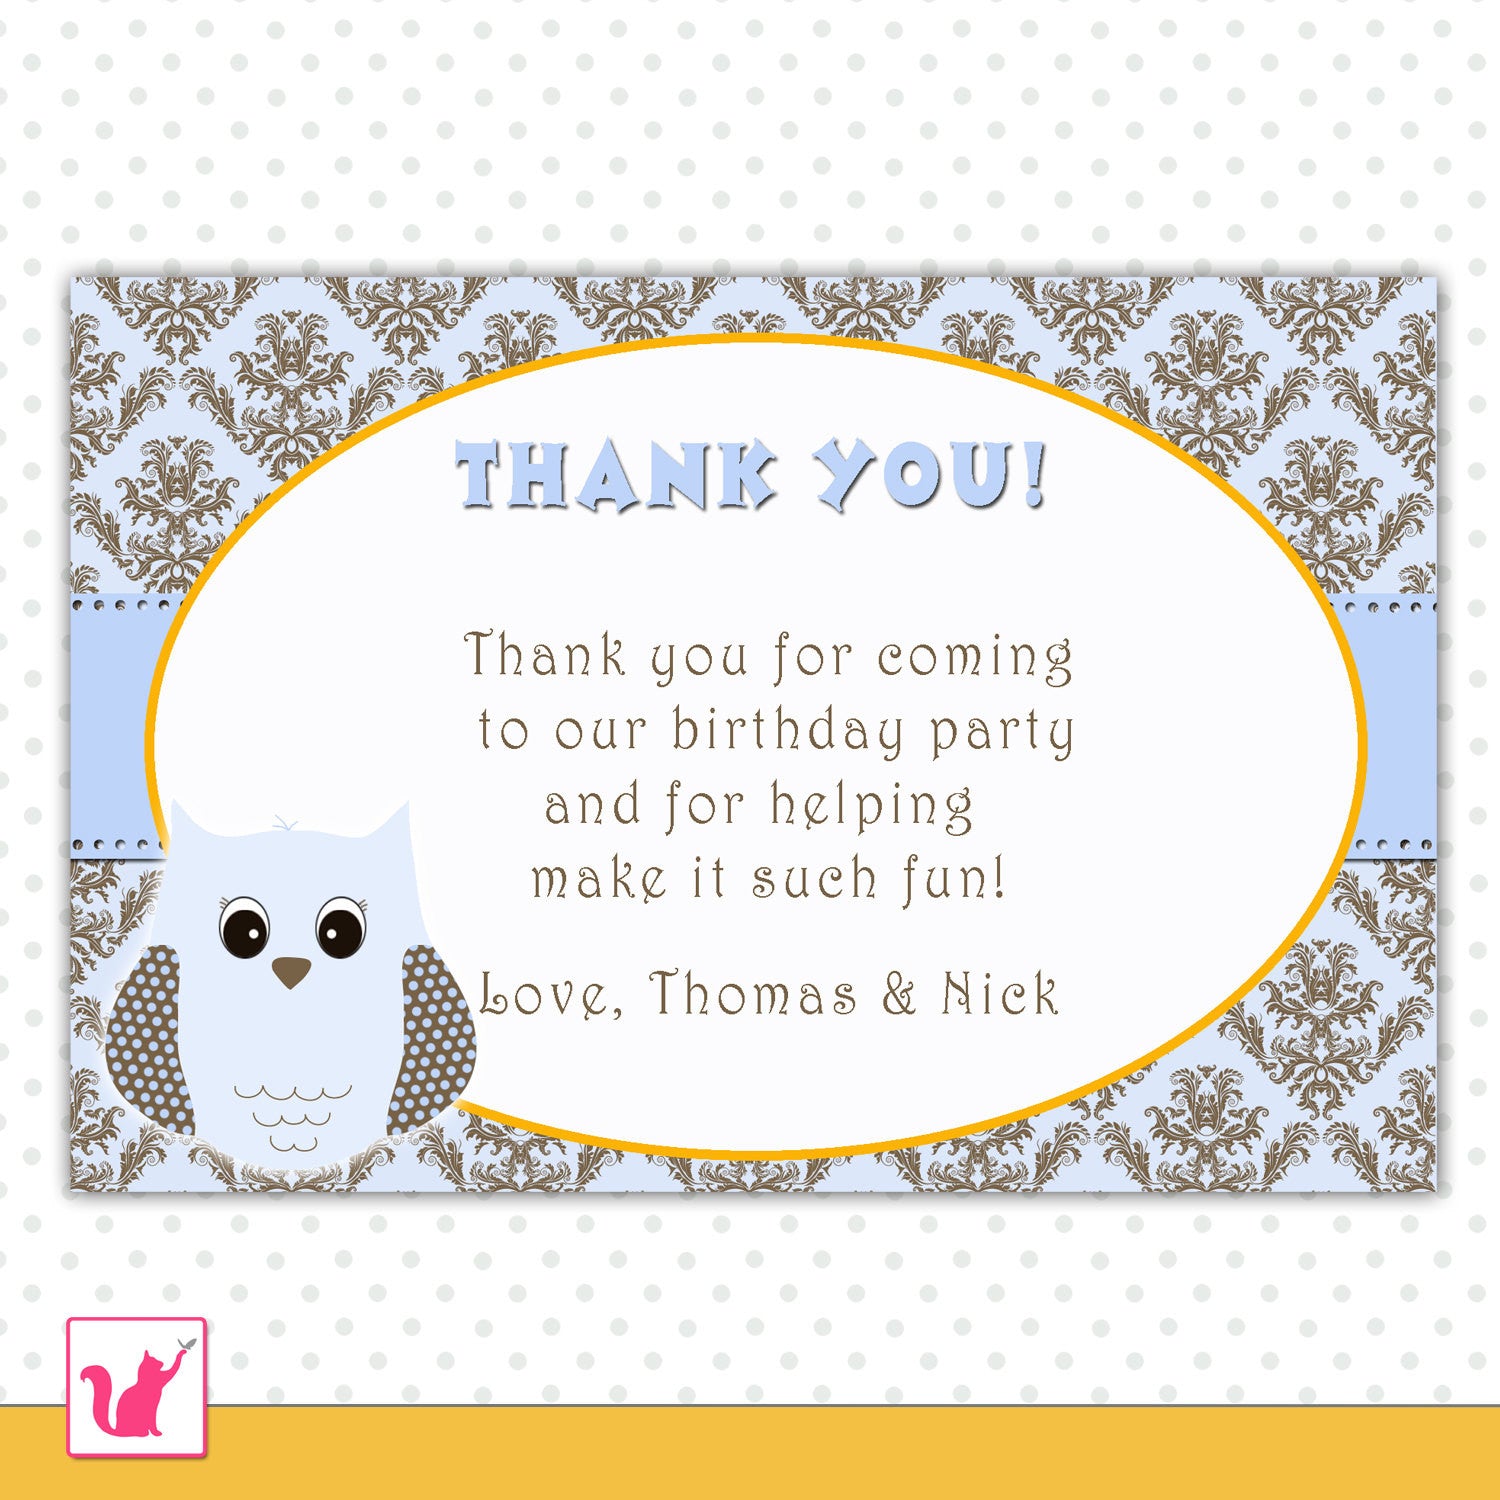 Star Thank You Card - Kids Birthday Party Notes Baby Boy Shower Blue G –  Pink the Cat